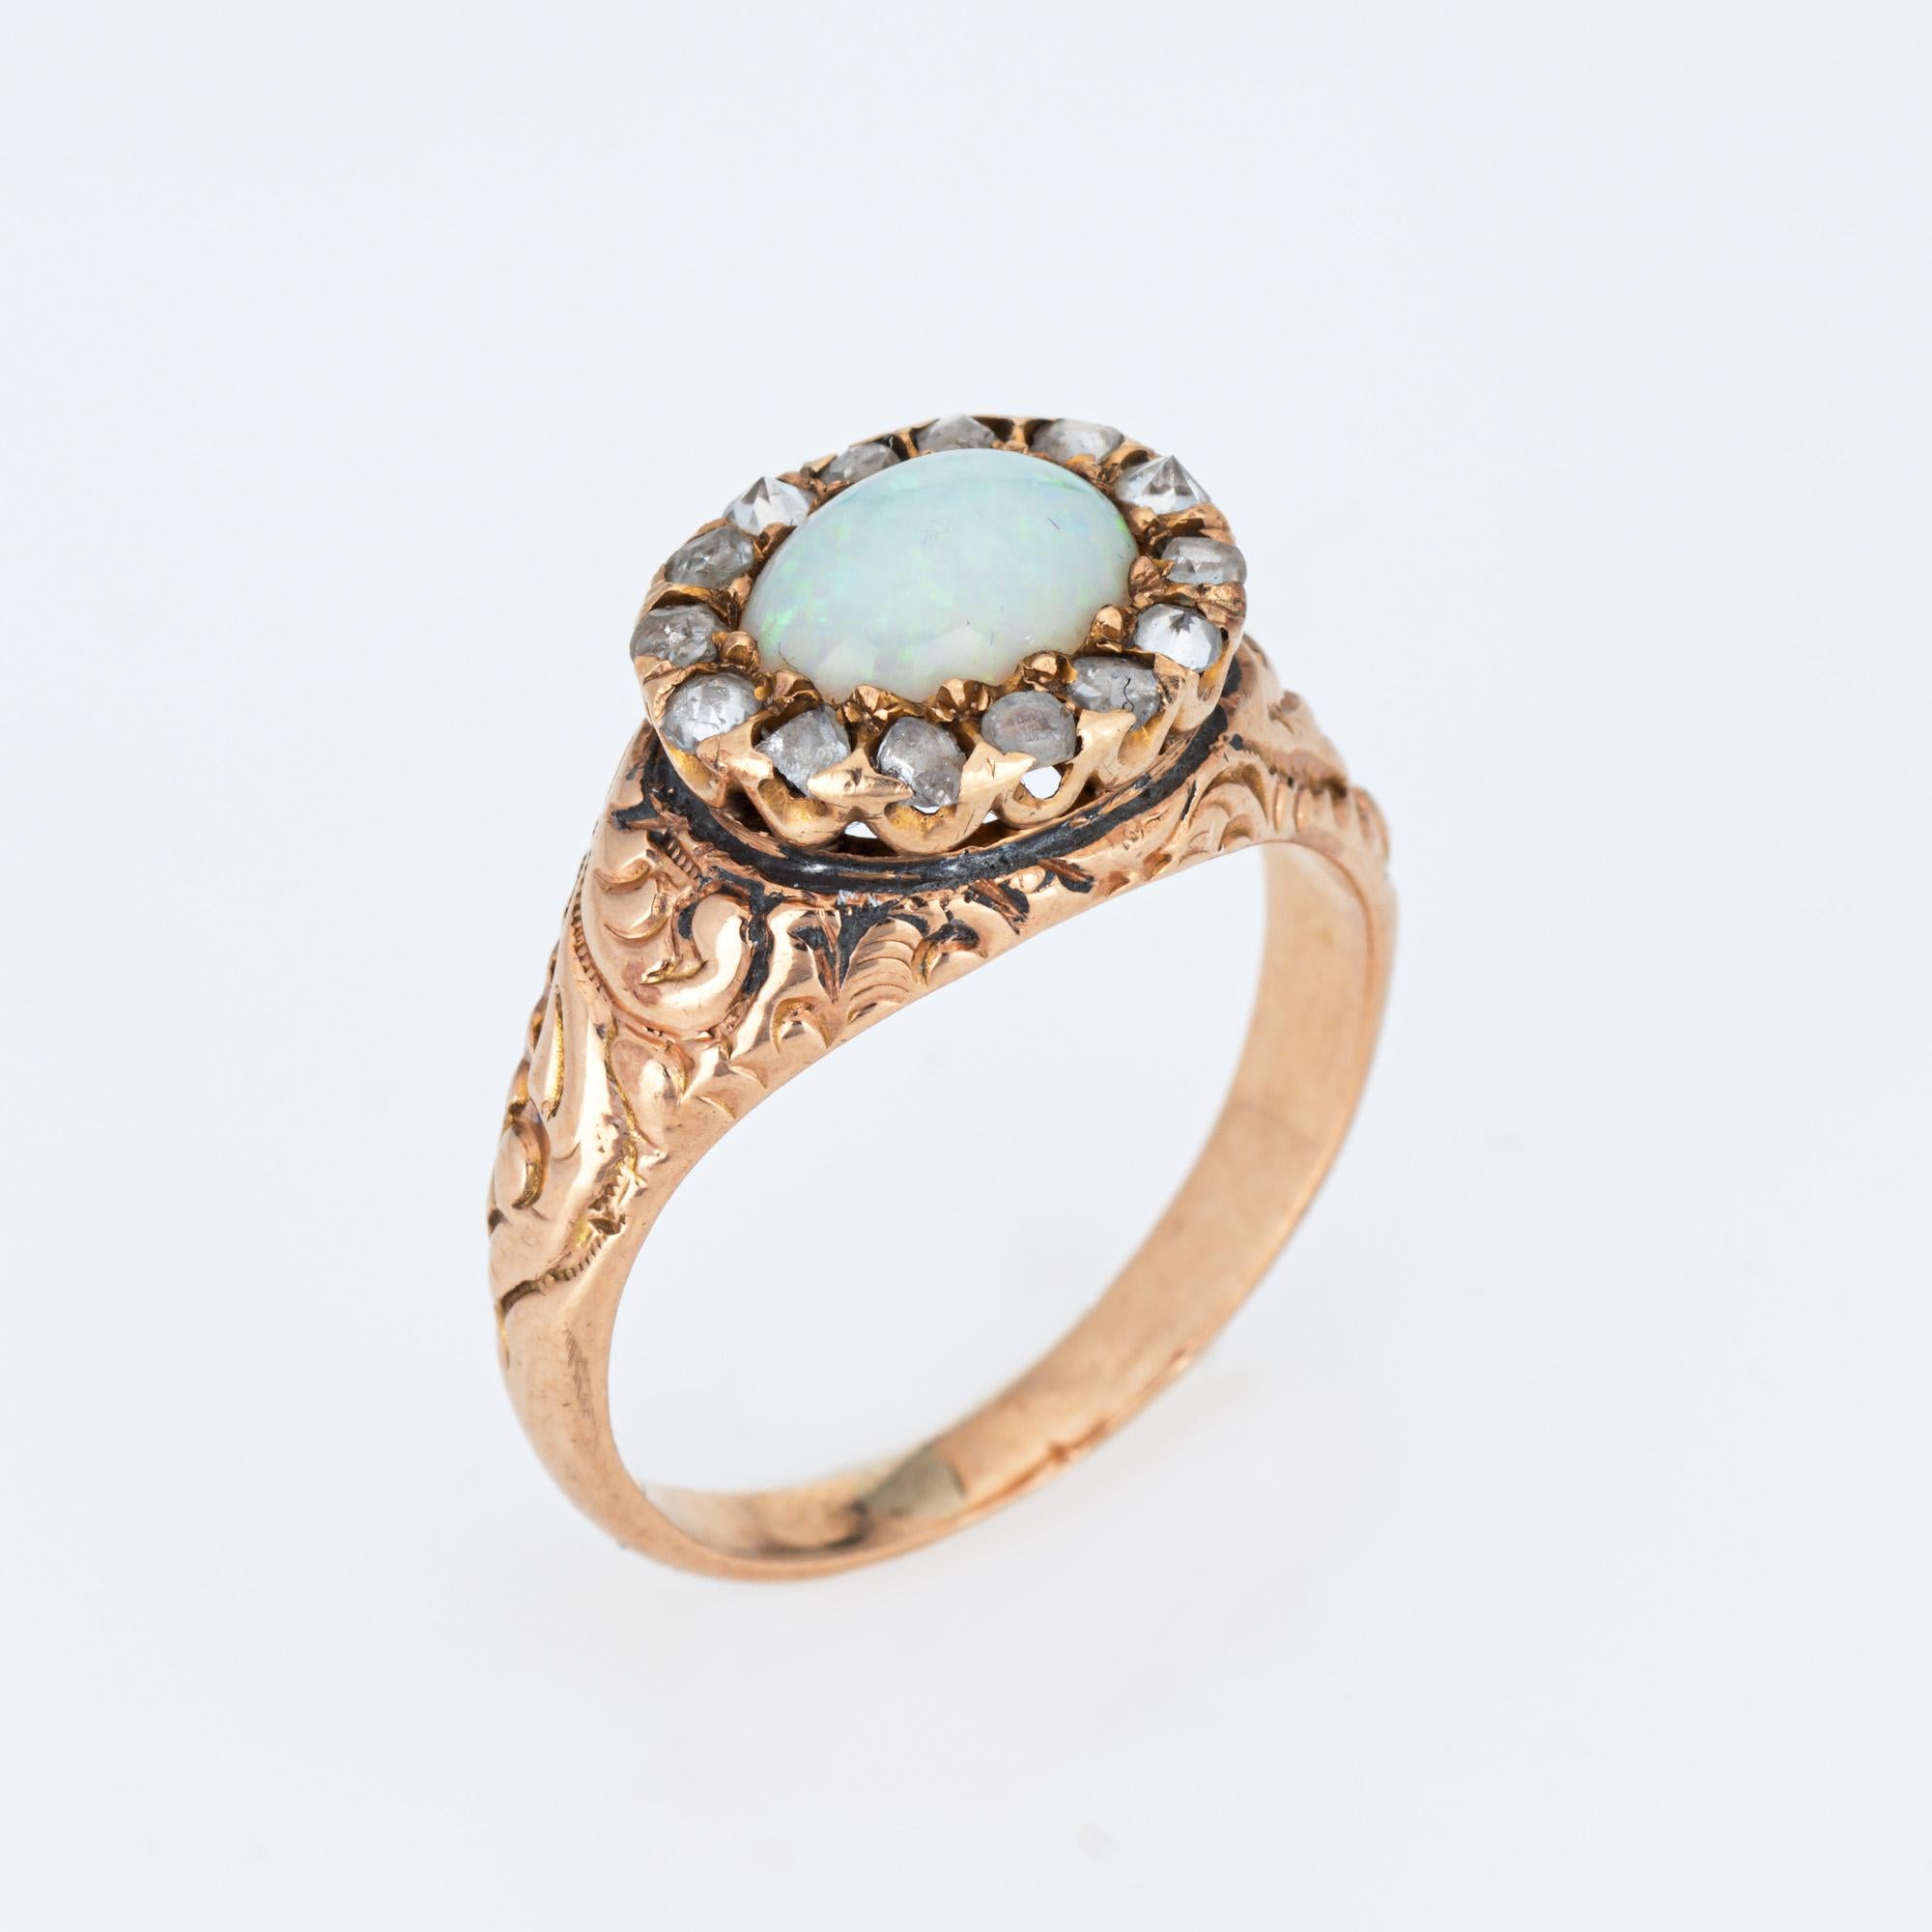 Stylish antique Victorian era ring (circa 1880s to 1900s), crafted in 14 karat yellow gold.

One opal measures 7mm x 5mm, accented with 14 estimated 0.02 carat old rose cut diamonds. The total diamond weight is estimated at 0.28 carats (estimated at